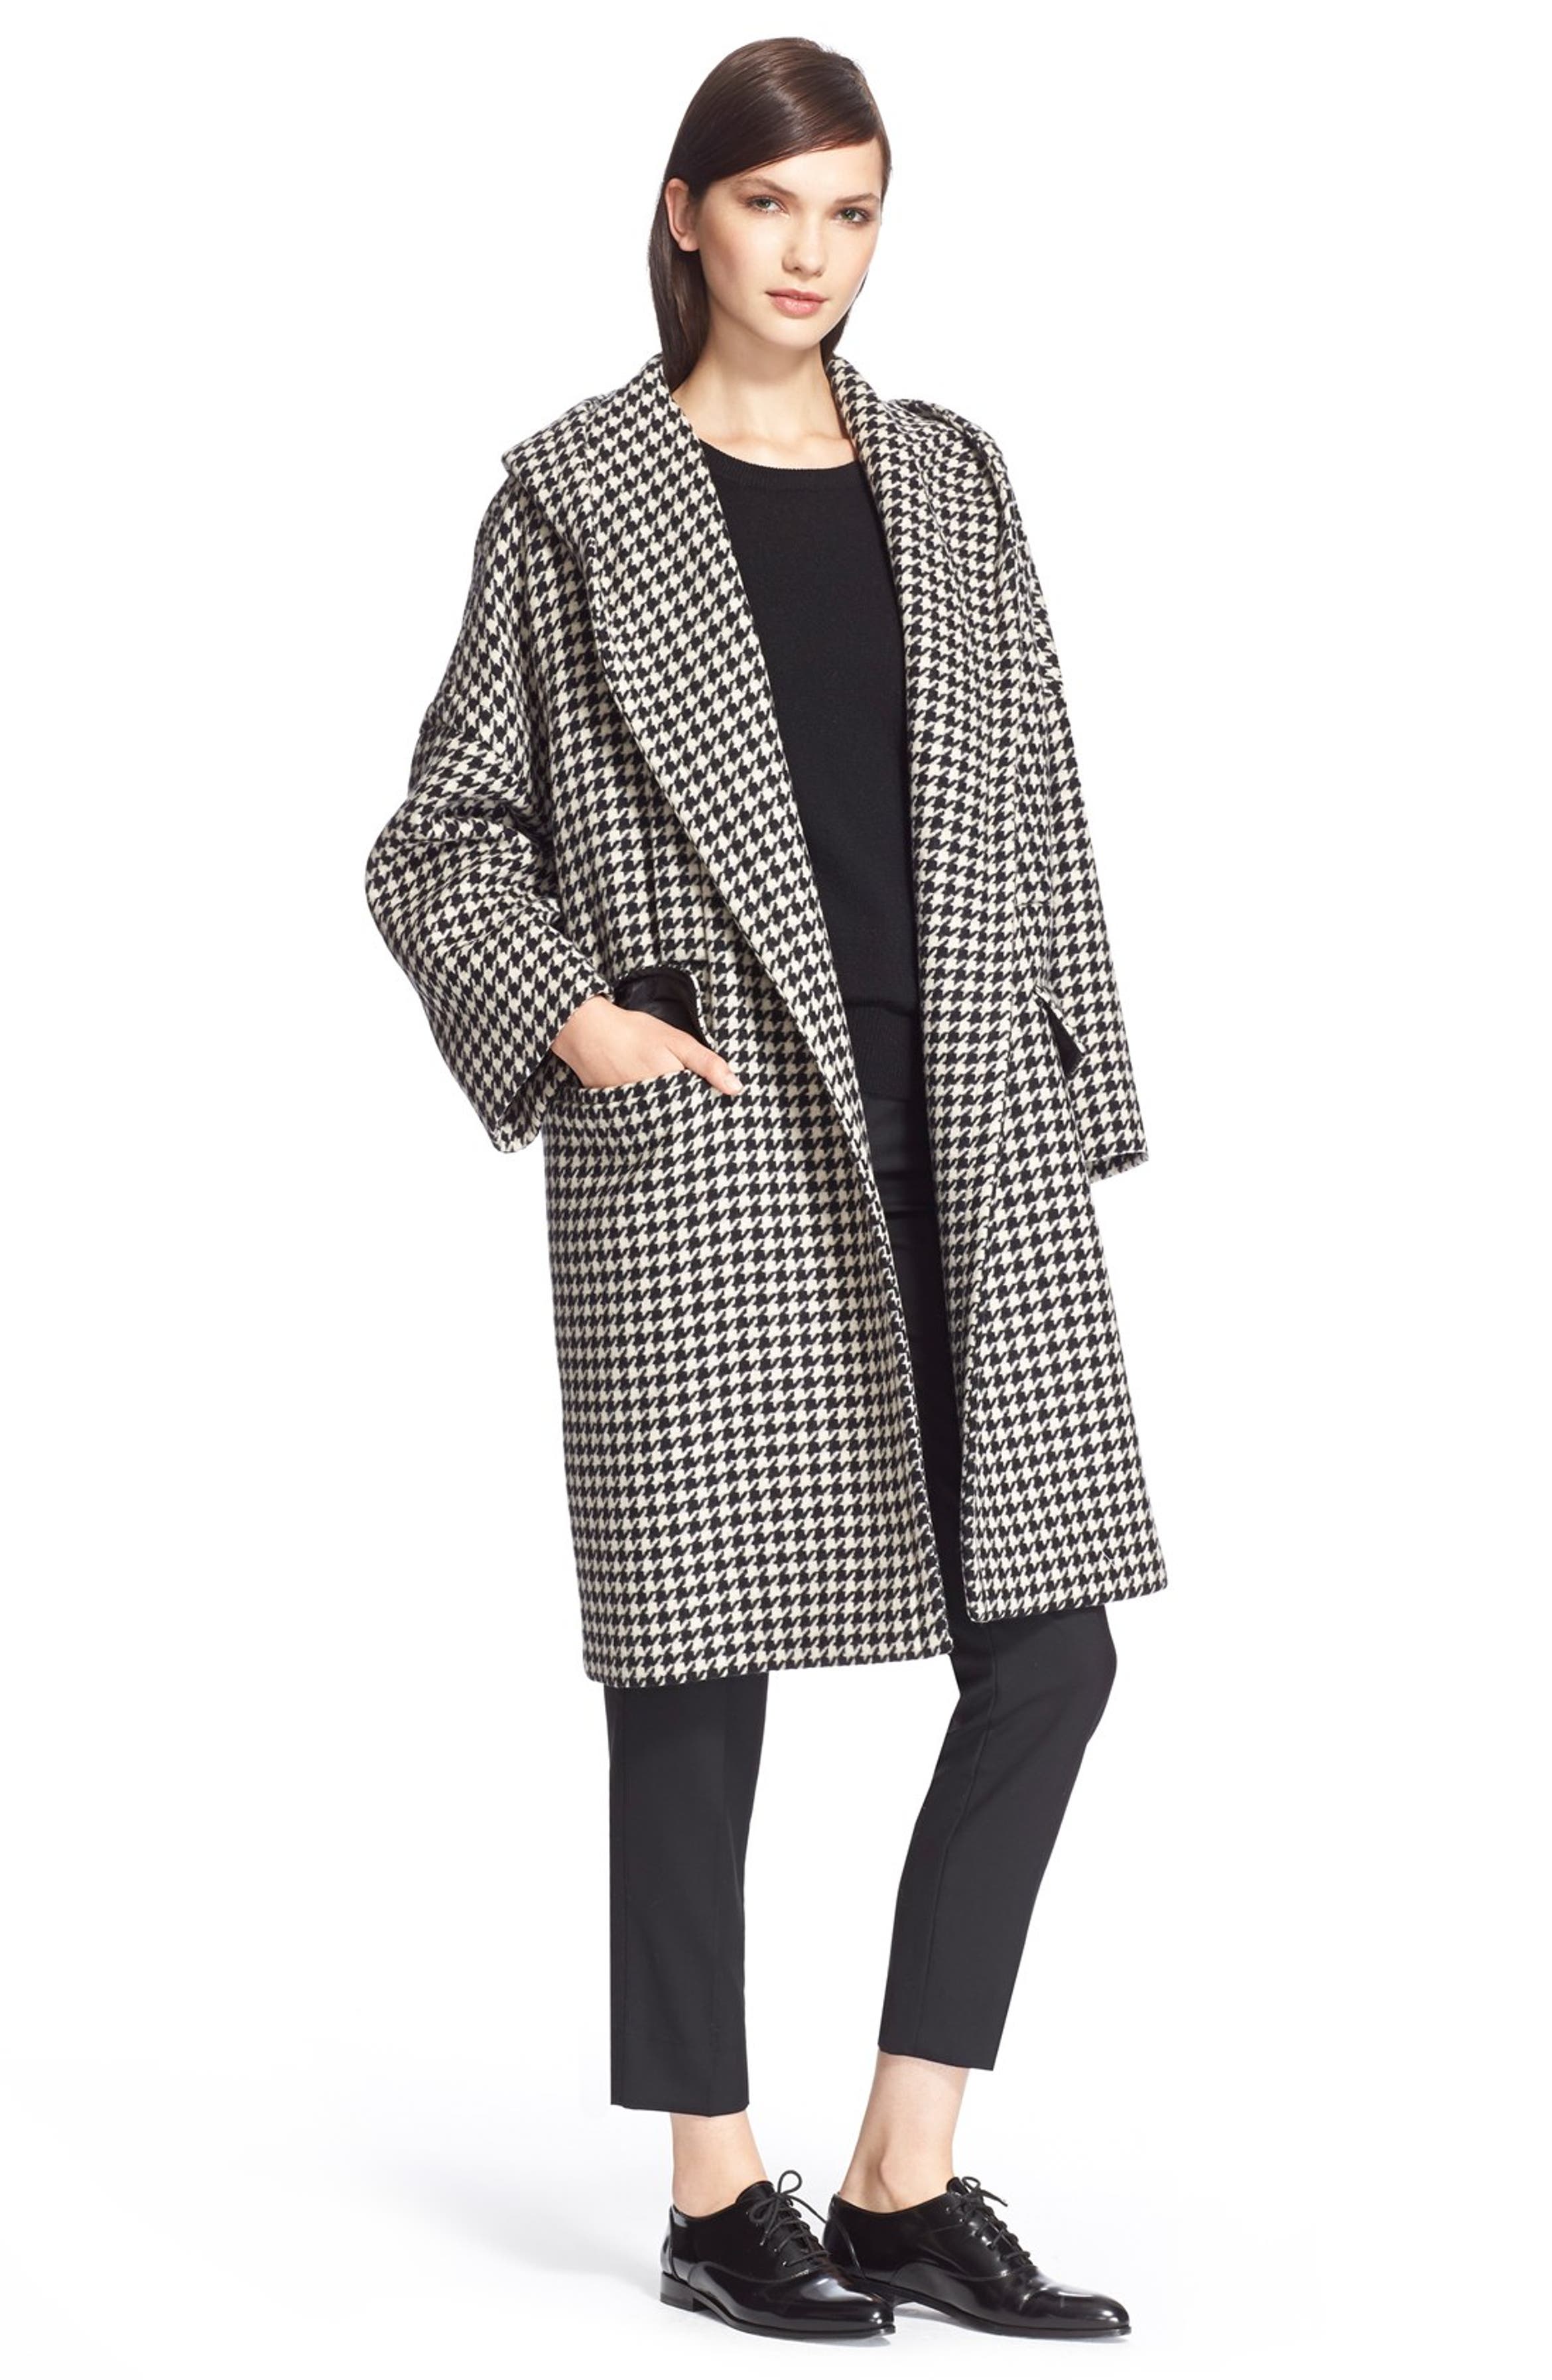 Max Mara 'Palchi' Houndstooth Print Wool & Cashmere Hooded Coat | Nordstrom